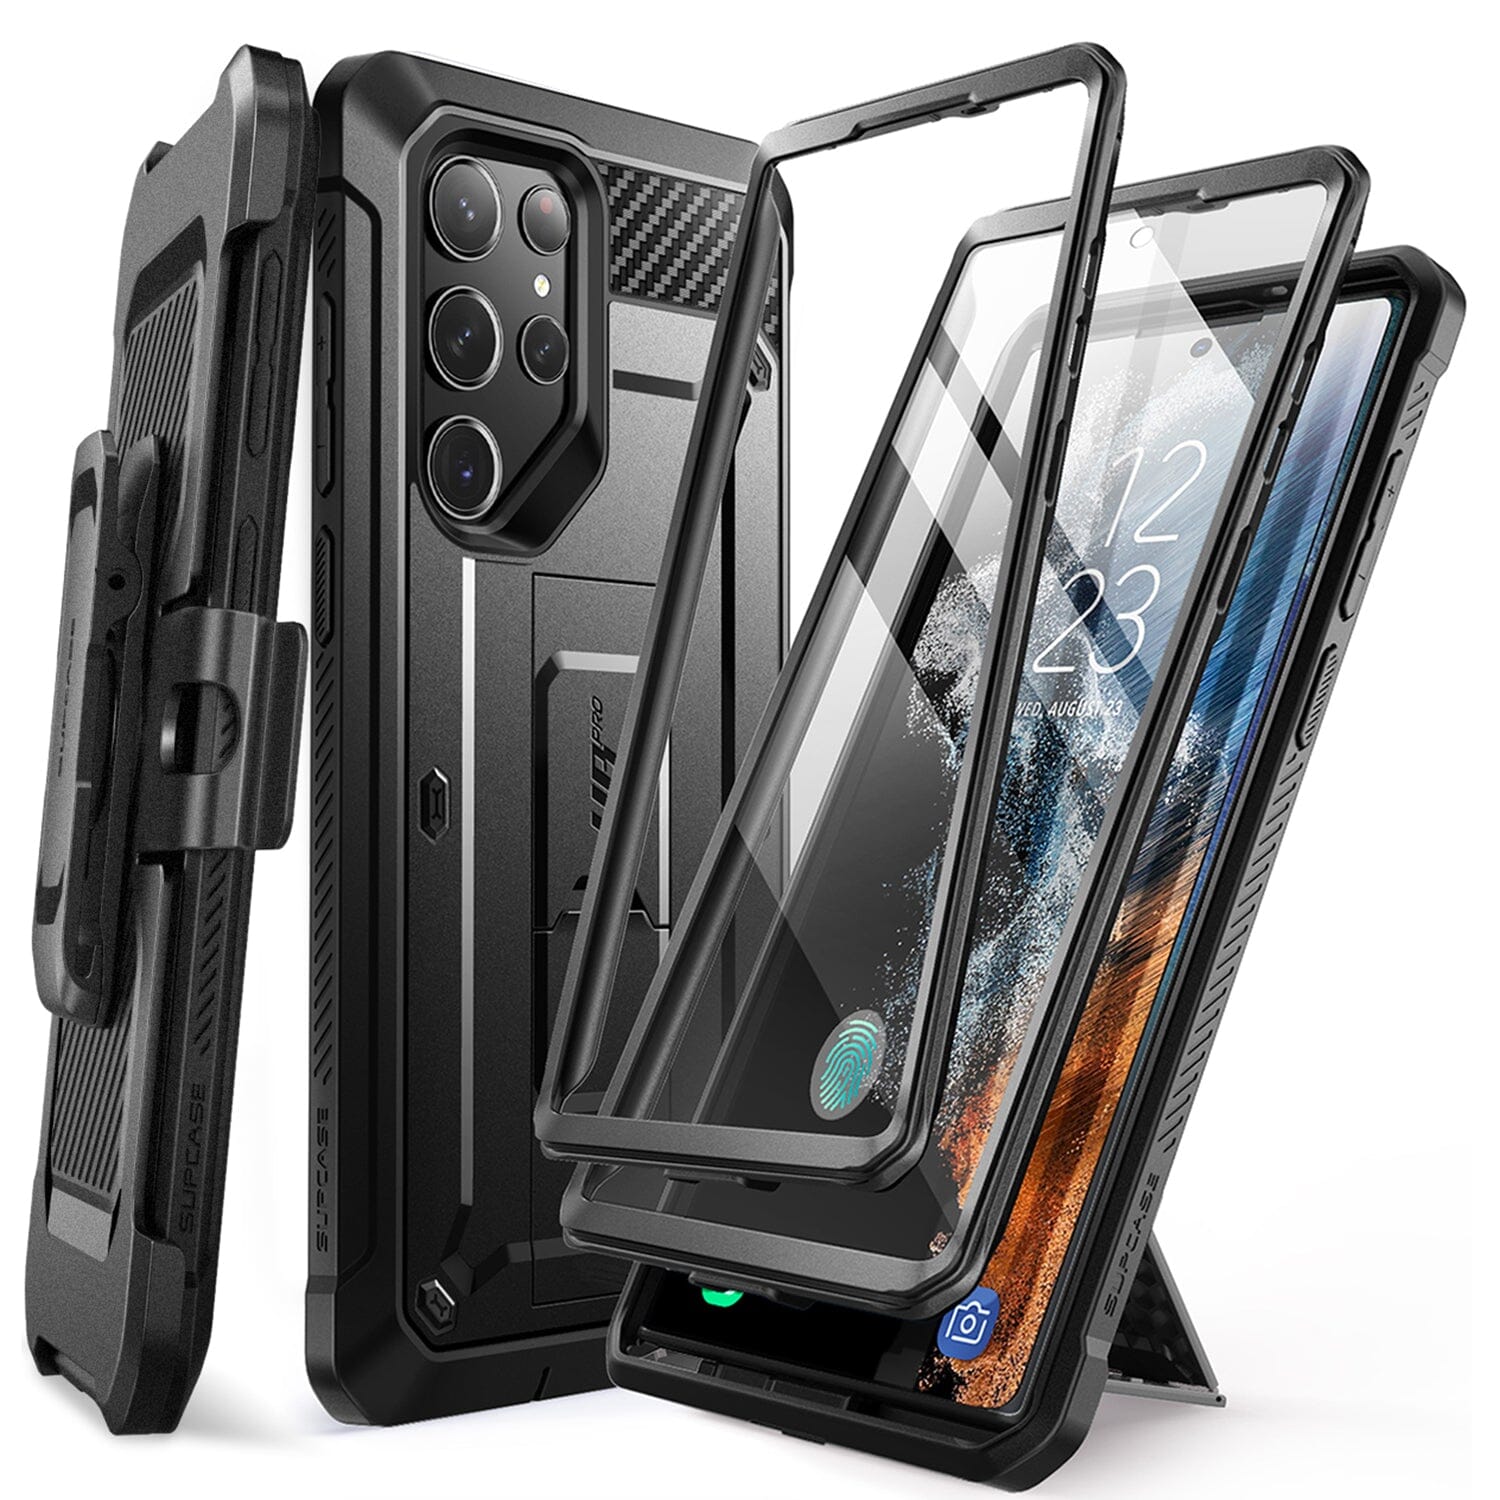 SUPCASE Unicorn Beetle Pro Case for Samsung Galaxy S23 Ultra 5G (2023 Release), [Extra Front Frame] Full-Body Dual Layer Rugged Belt-Clip & Kickstand Case with Built-in Screen Protector ONE2WORLD Black 